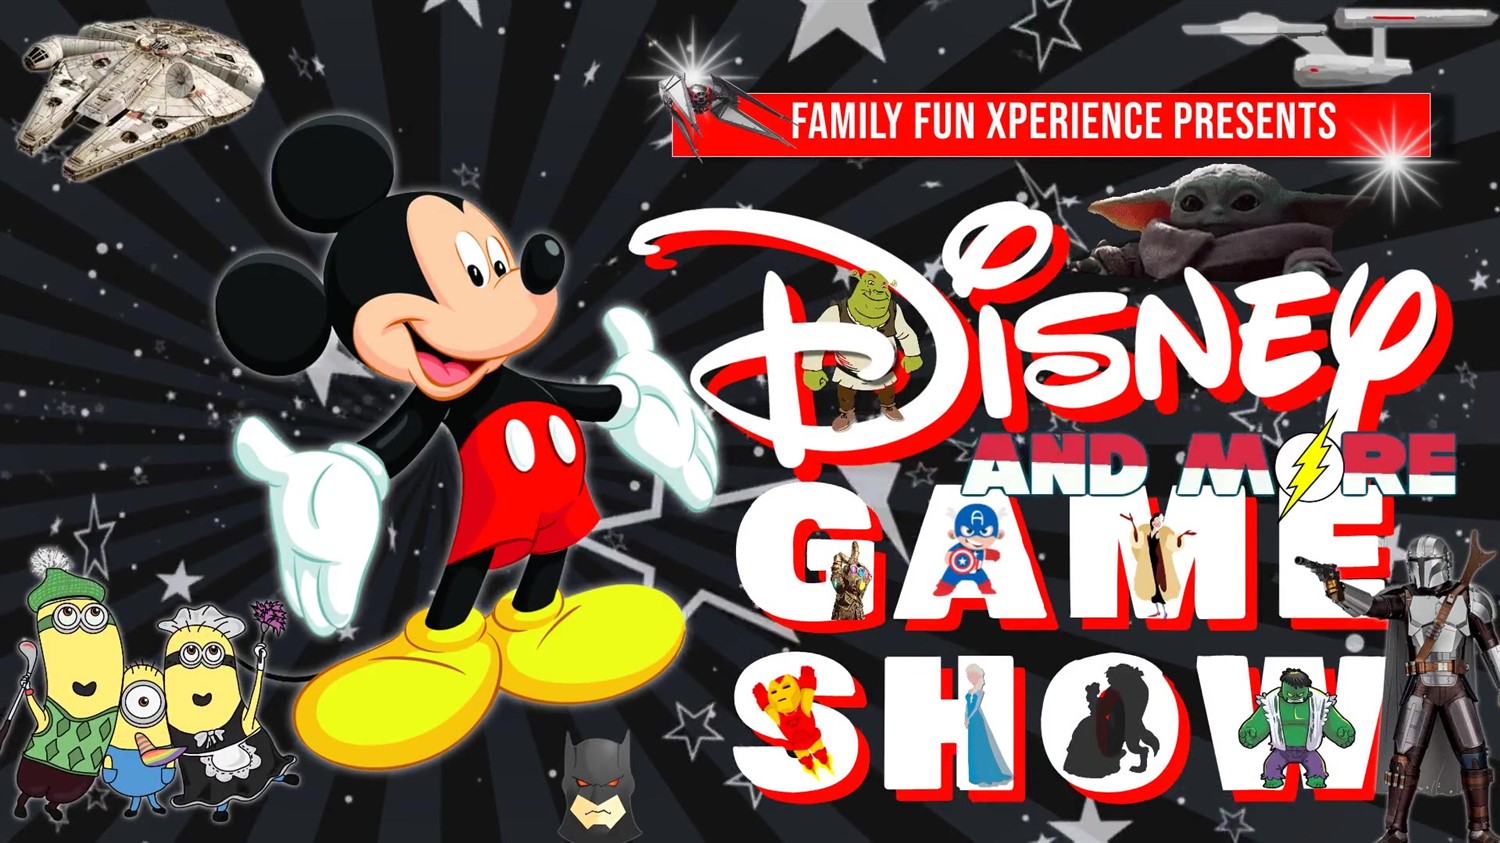 DISNEY & MORE GAME SHOW Animation, movies, sci-fi, superheroes, & much more! on ago. 30, 19:00@FFX Theatre - Pick a seat, Buy tickets and Get information on Family Fun Xperience tickets.ffxshow.org